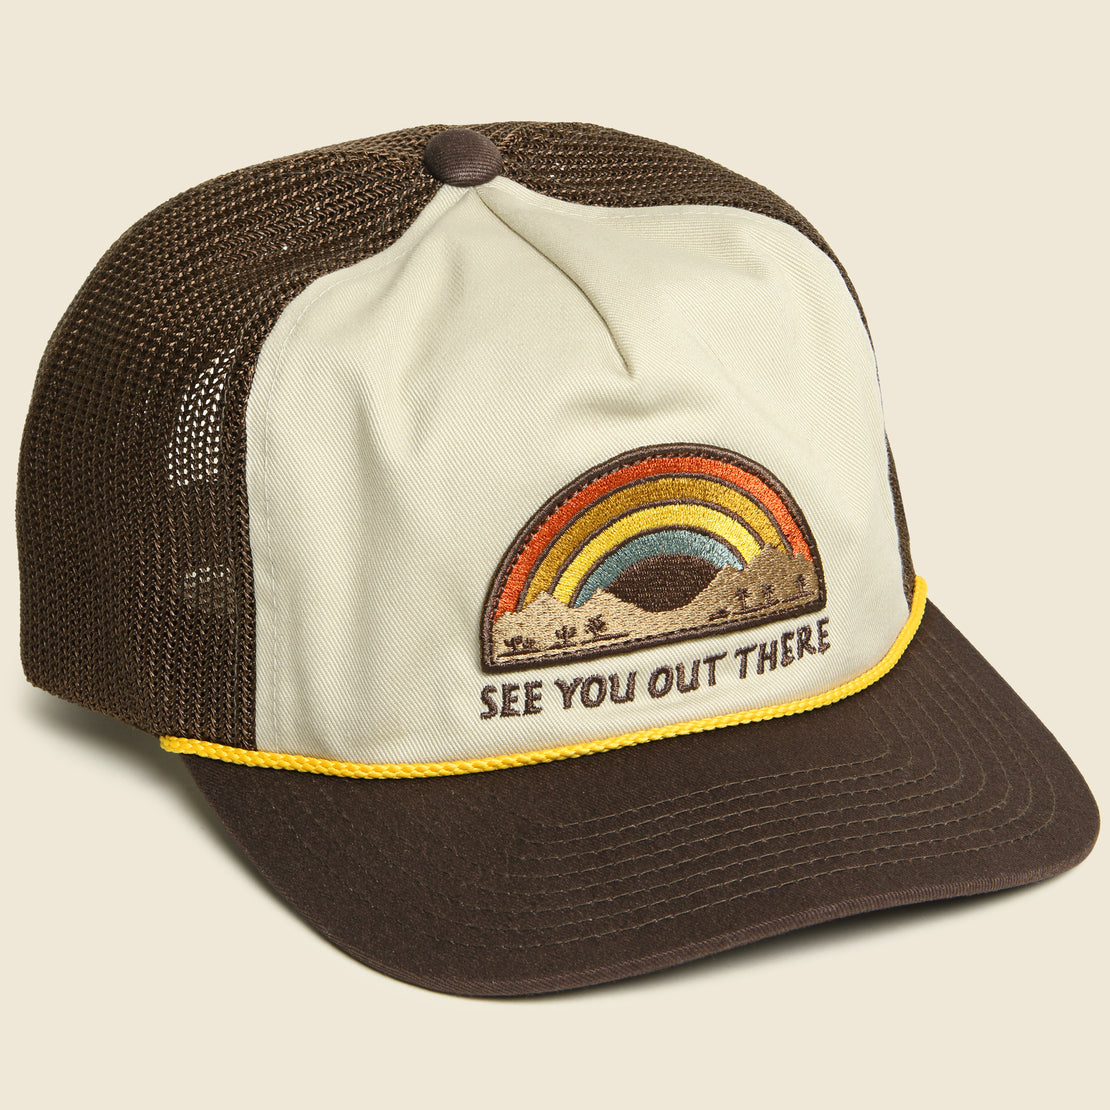 Katin See You Out There Trucker Hat - Brown